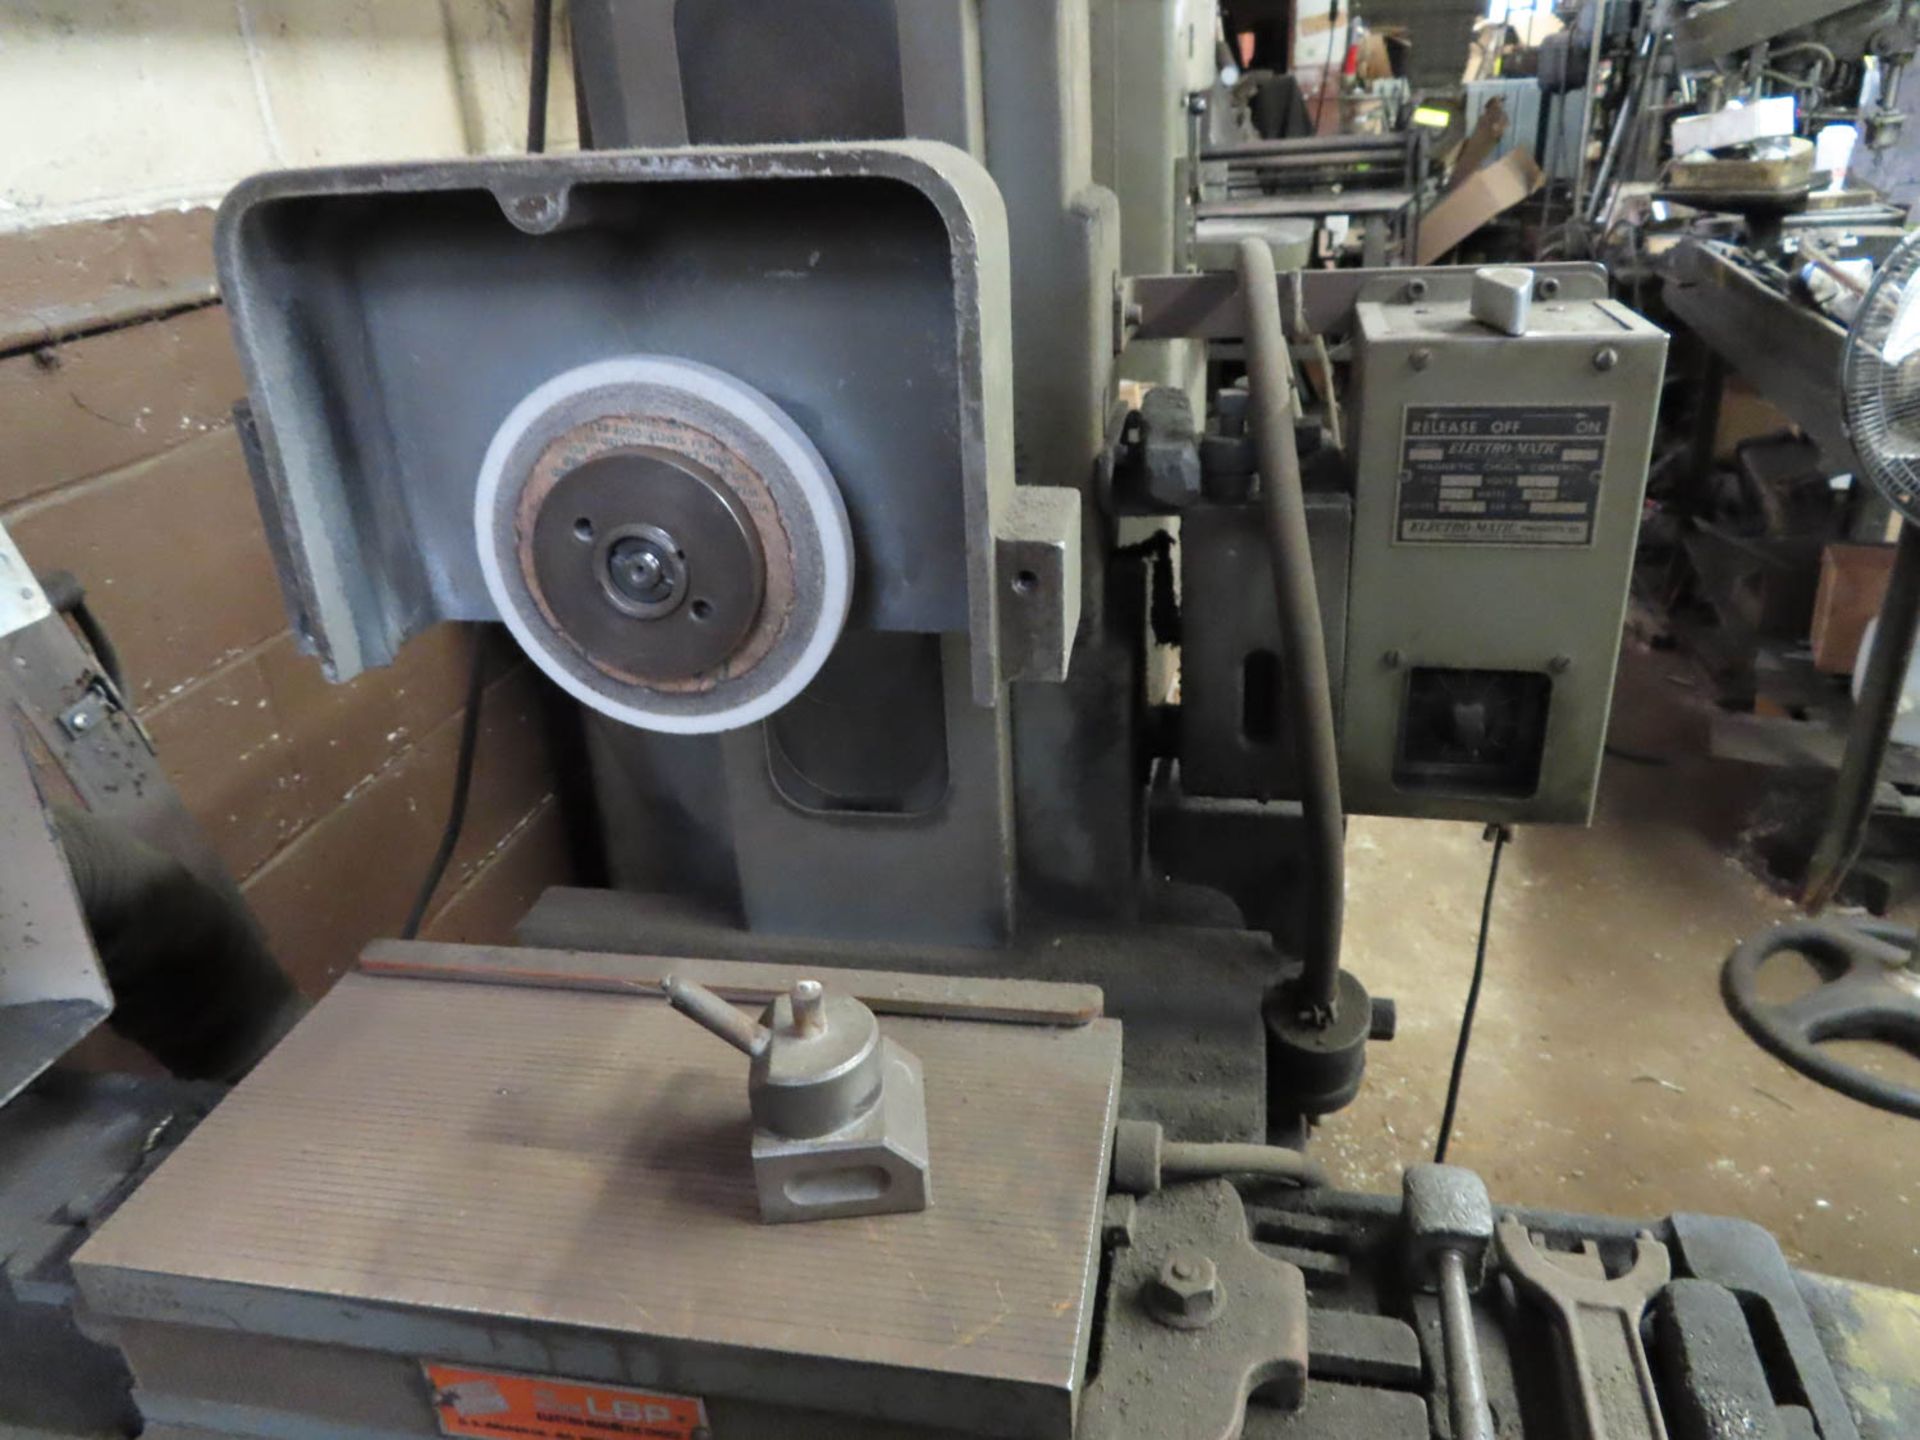 BOYAR SCHULTZ MDL. H-612 6" X 12" HAND FEED SURFACE GRINDER, LBP ELECTROMAGNETIC CHUCK, DIRECT DRIVE - Image 2 of 2